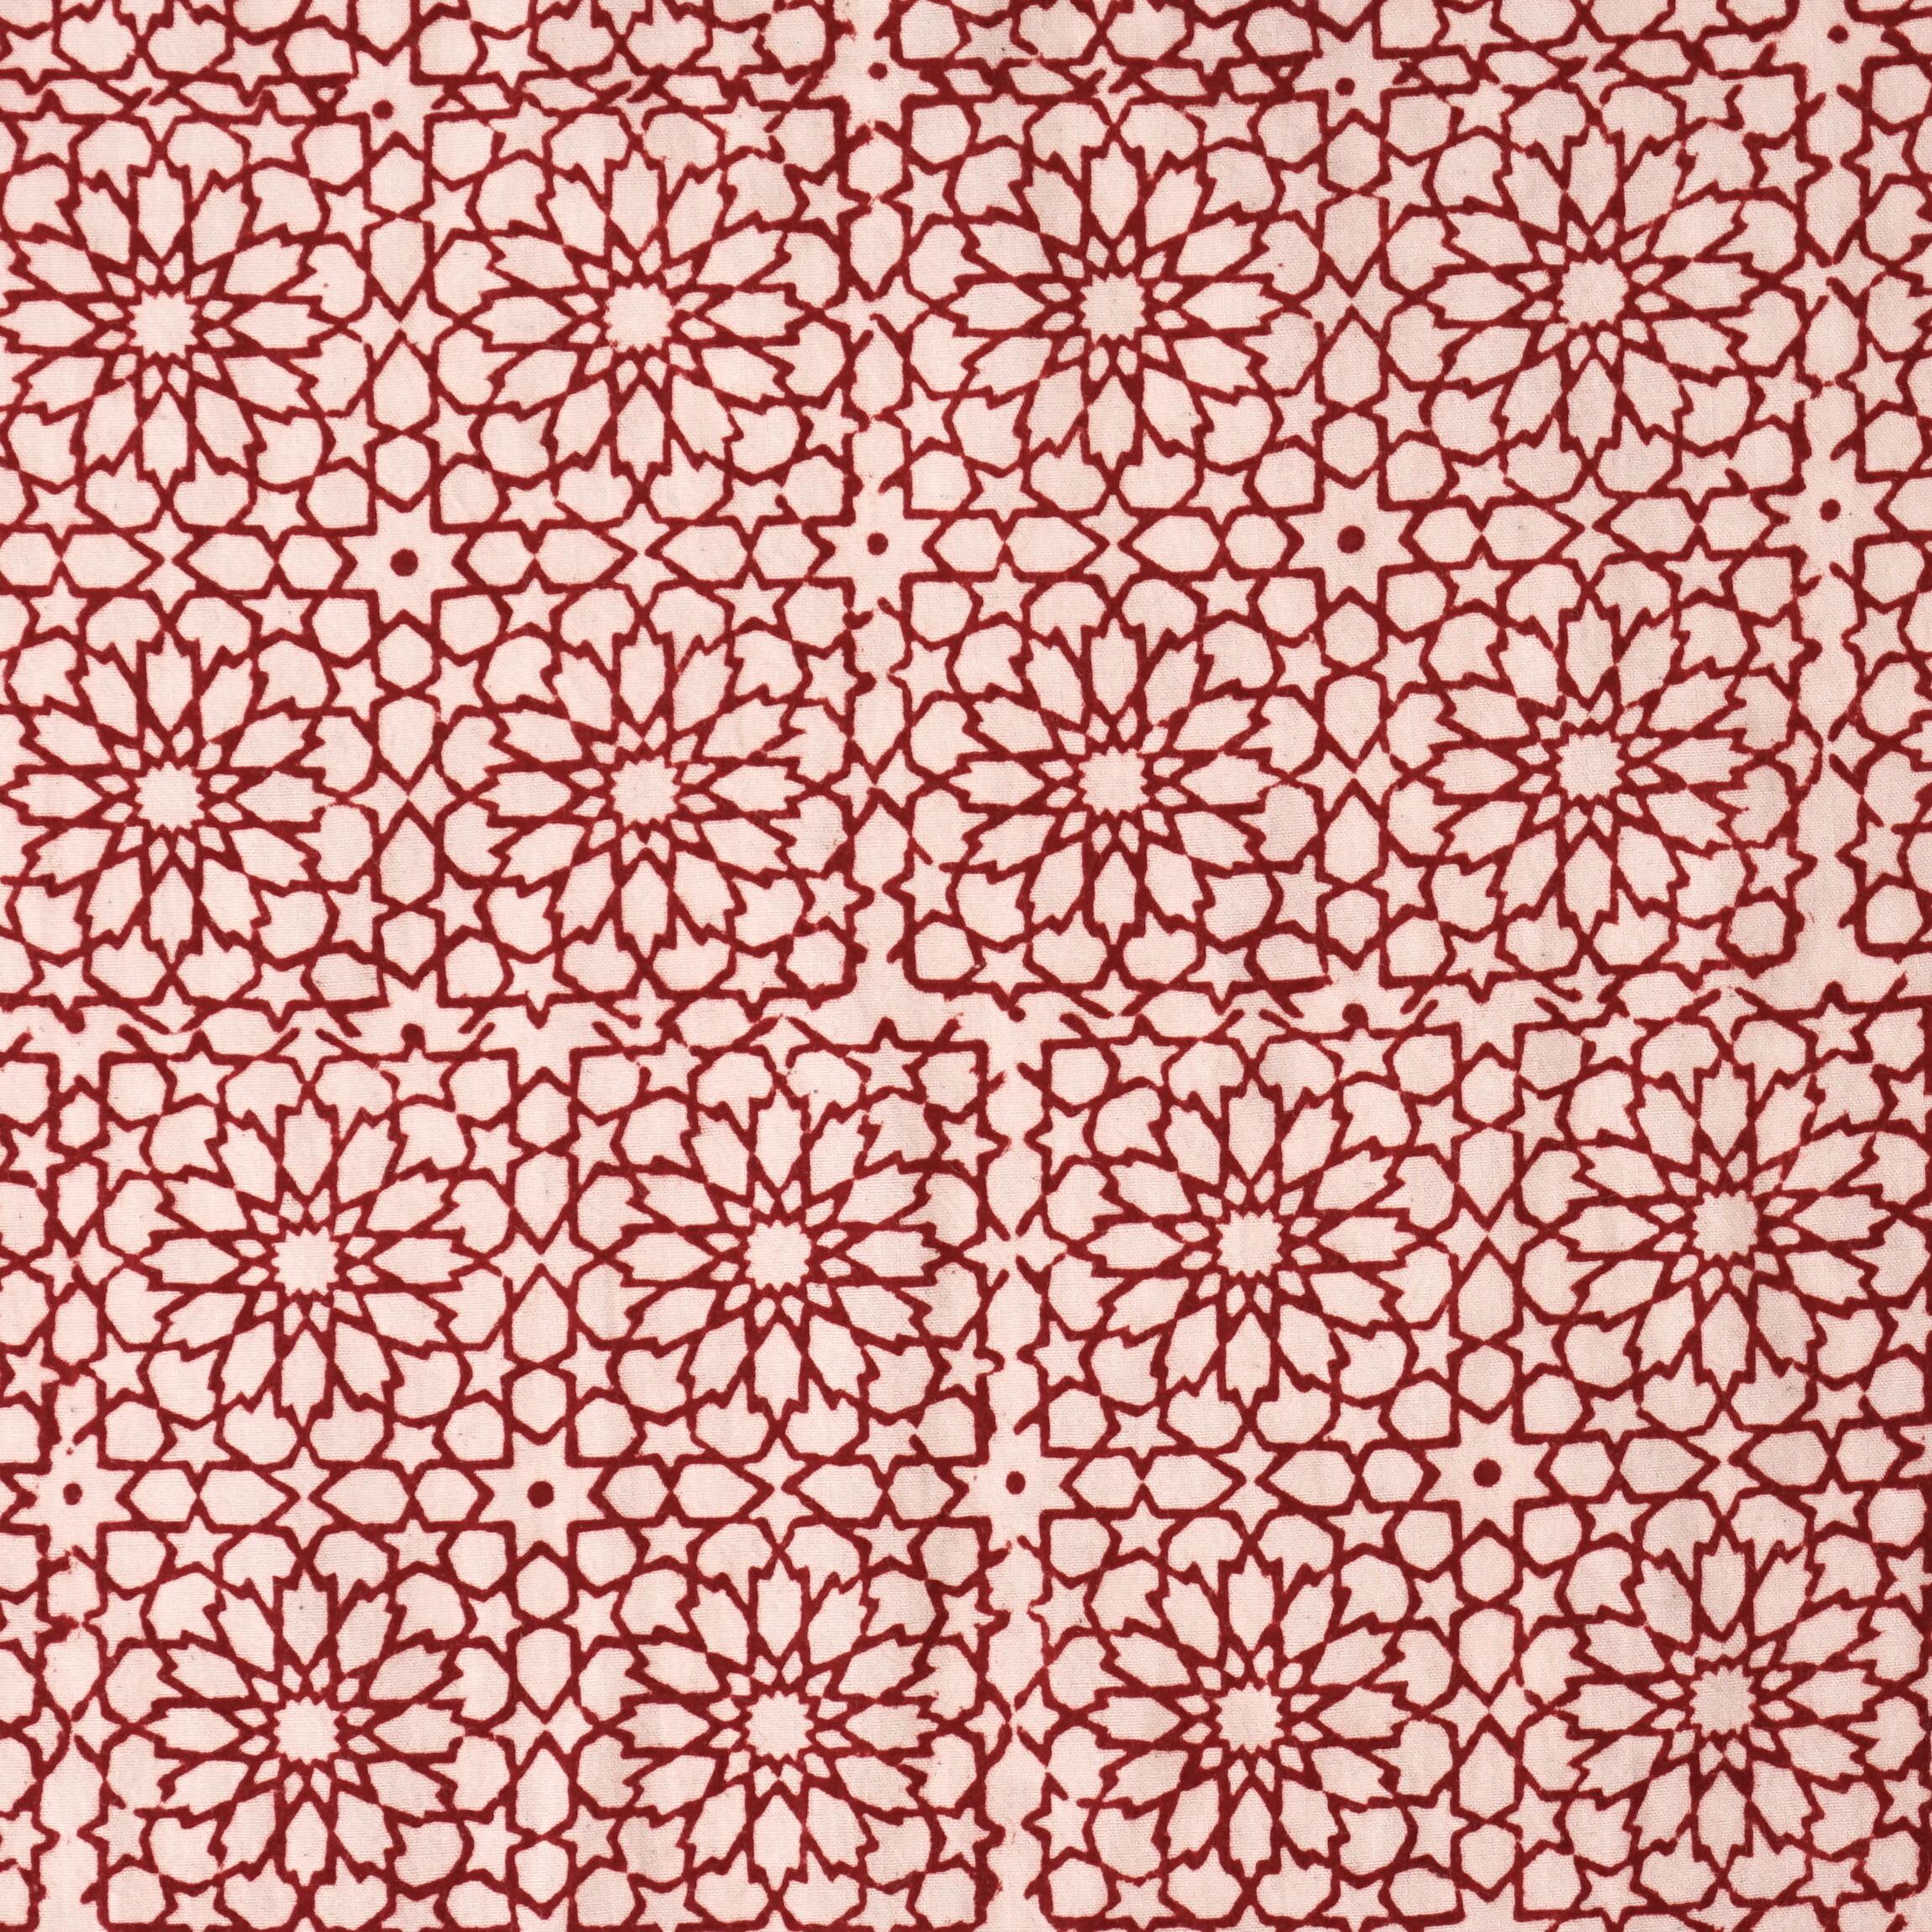 100% Block-Printed Cotton Fabric From India - Floral Sublimity Design - Alizarin Red Dye - Flat